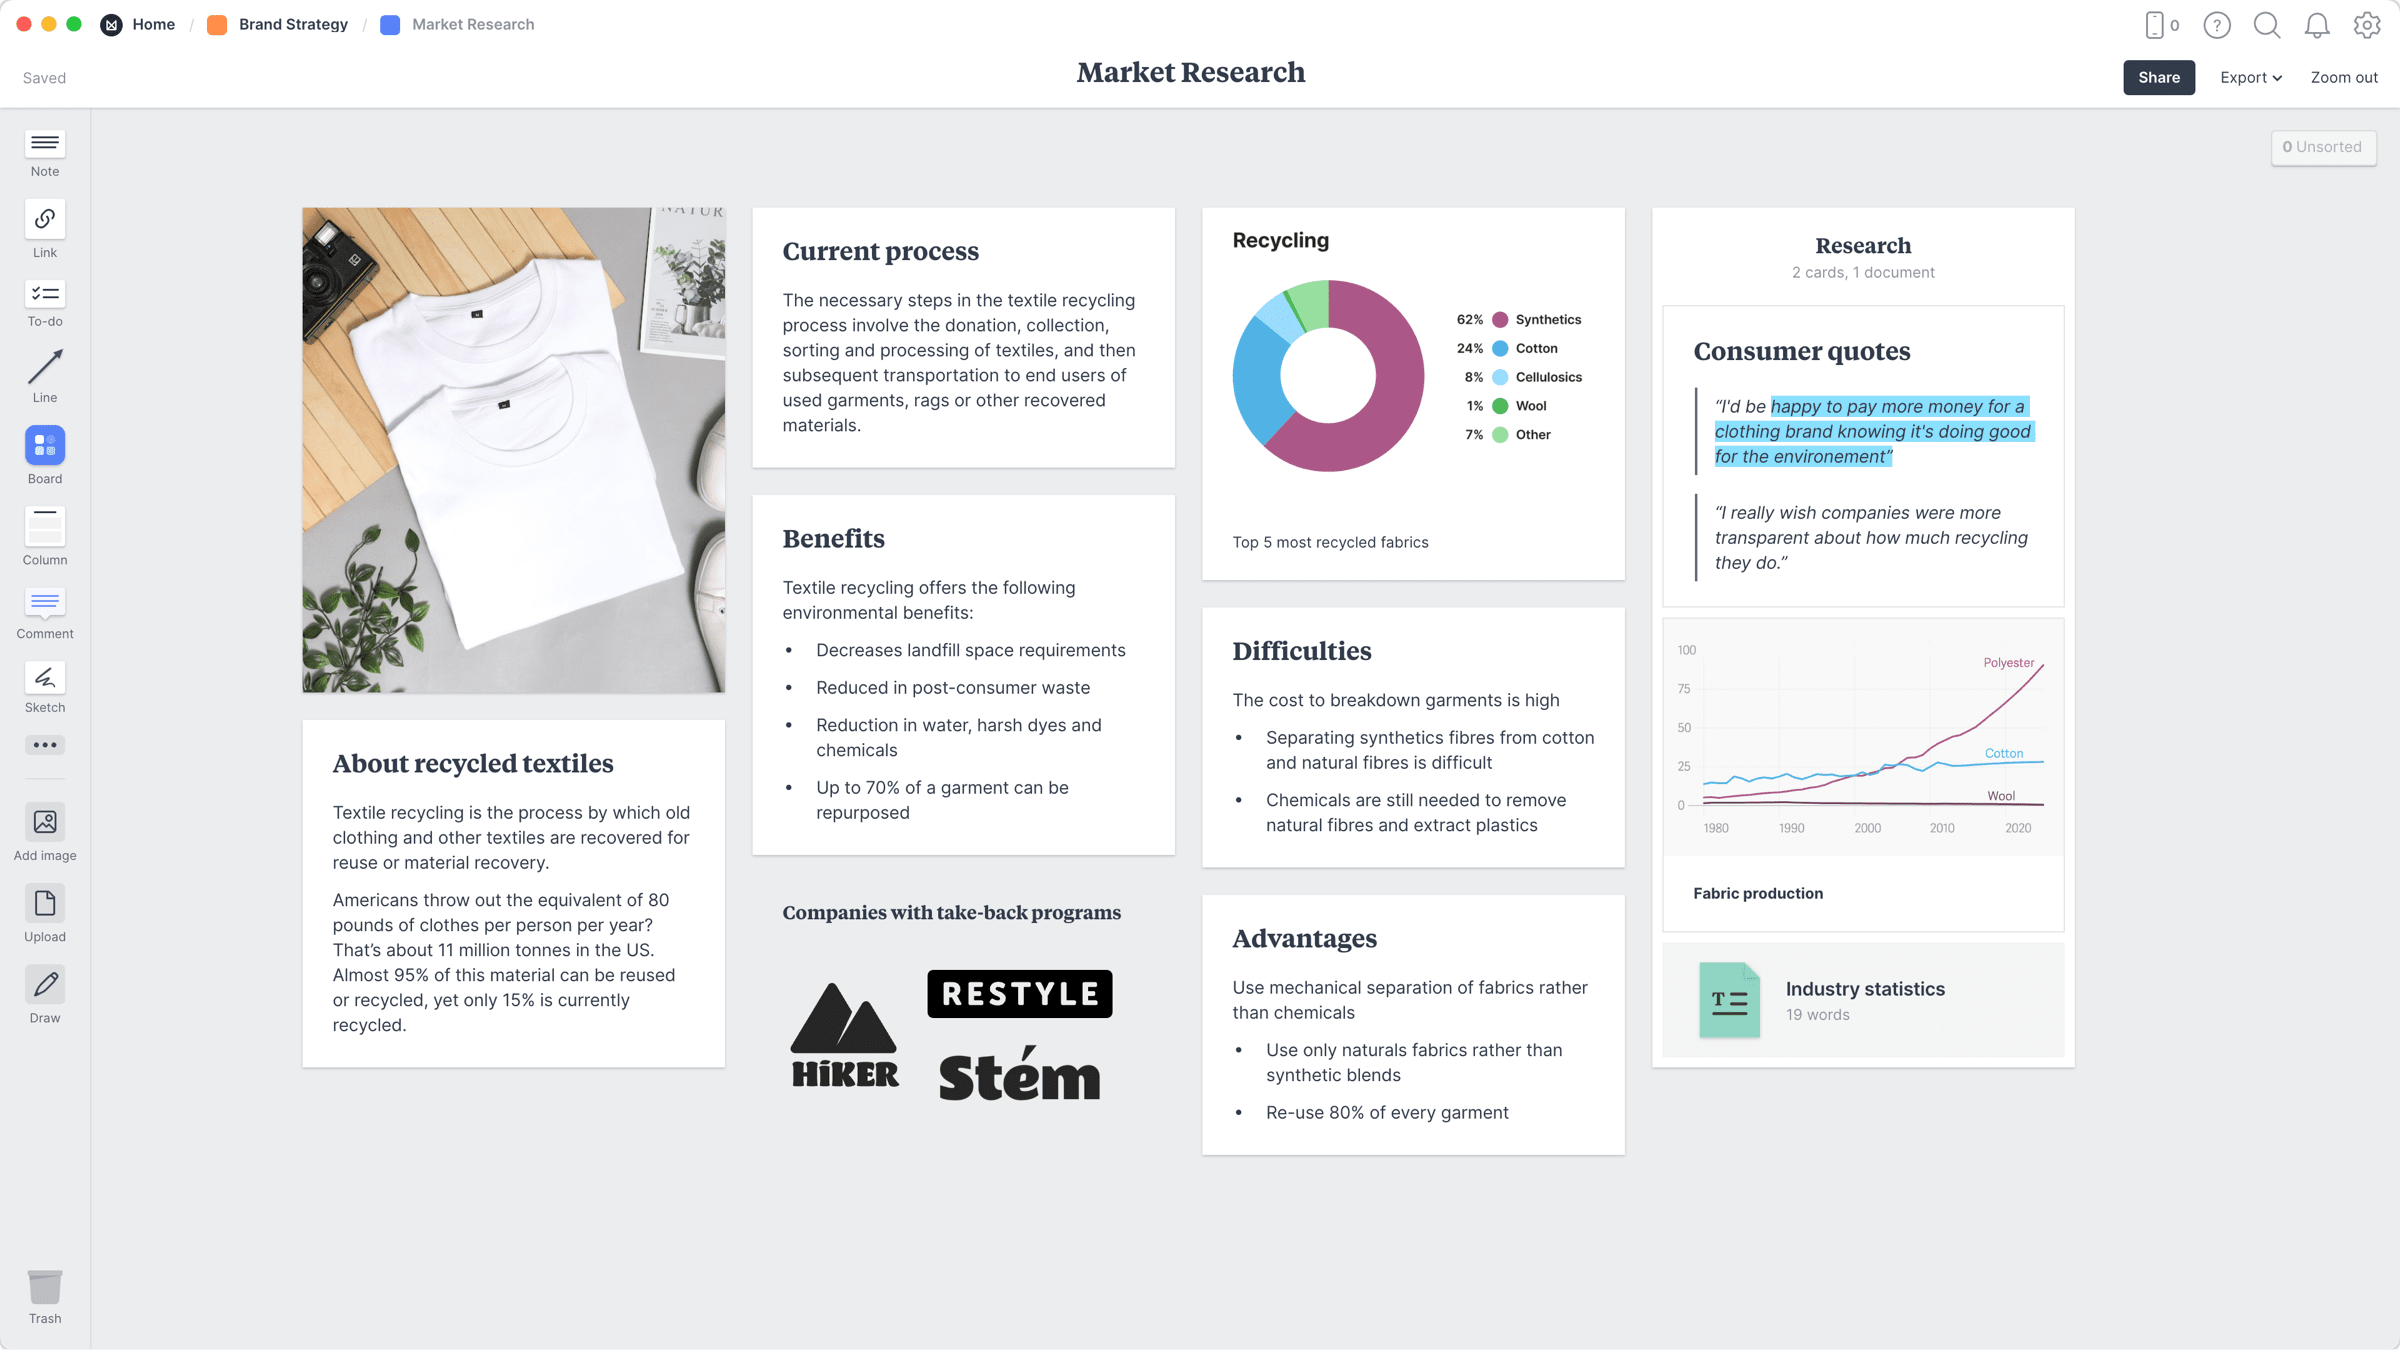 Market Research Template, within the Milanote app